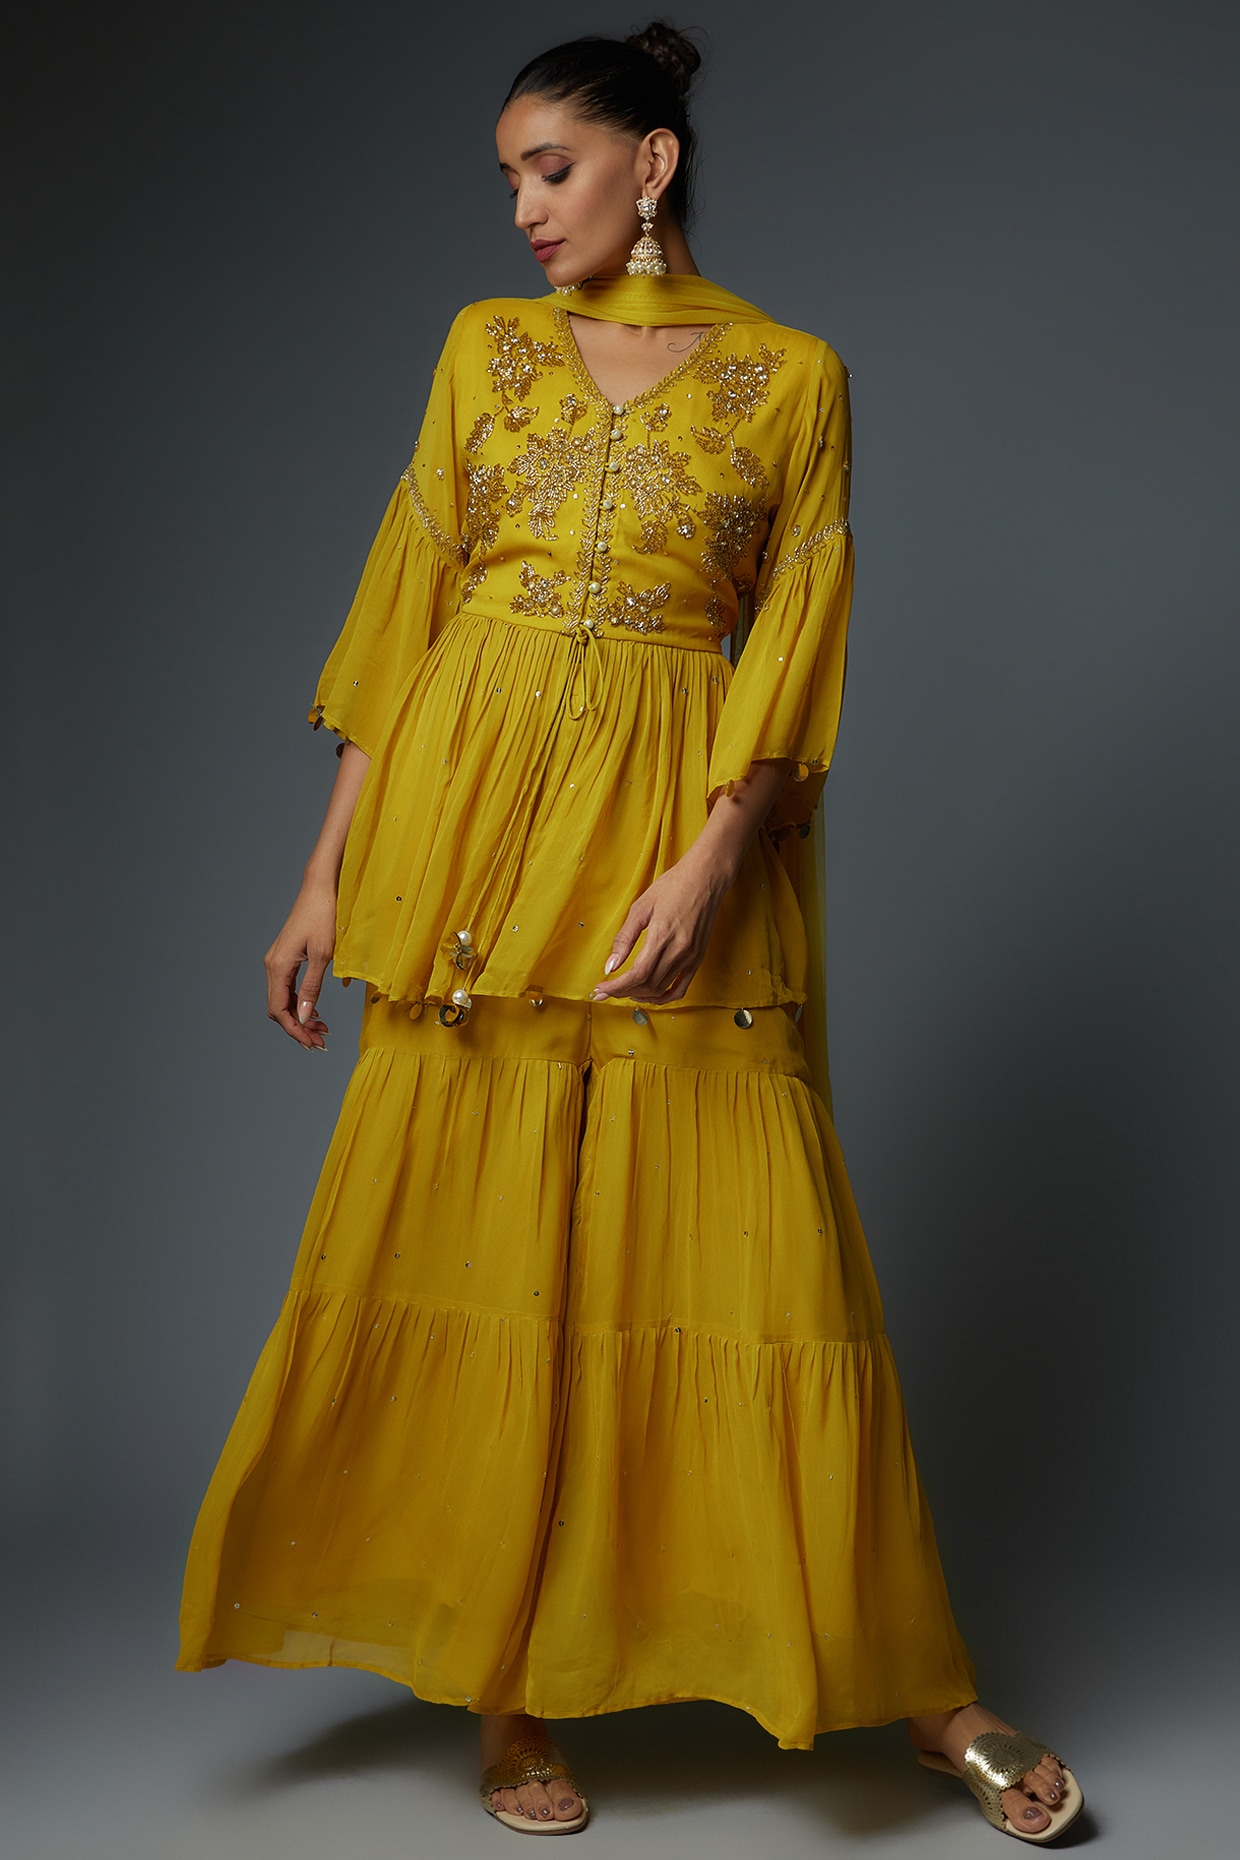 Latest) Yellow Sharara Suit For Wedding Party 2022